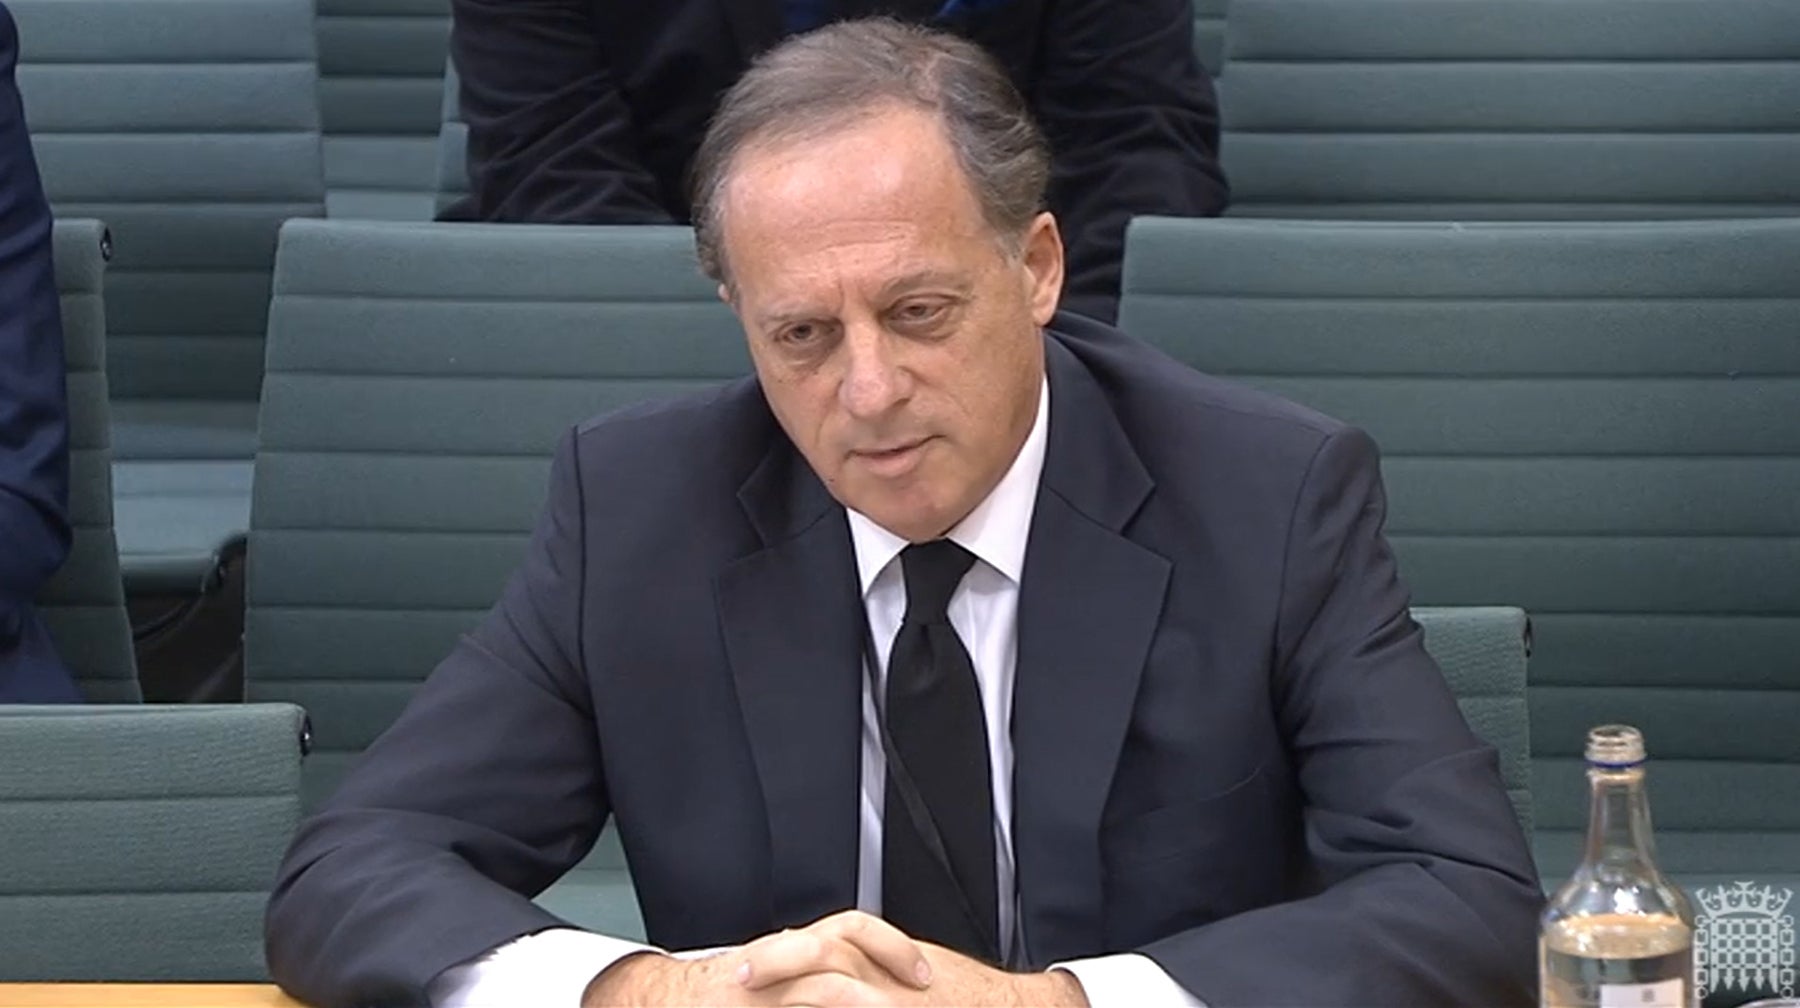 BBC chairman Richard Sharp appearing before the Commons Digital, Culture, Media and Sport Committee